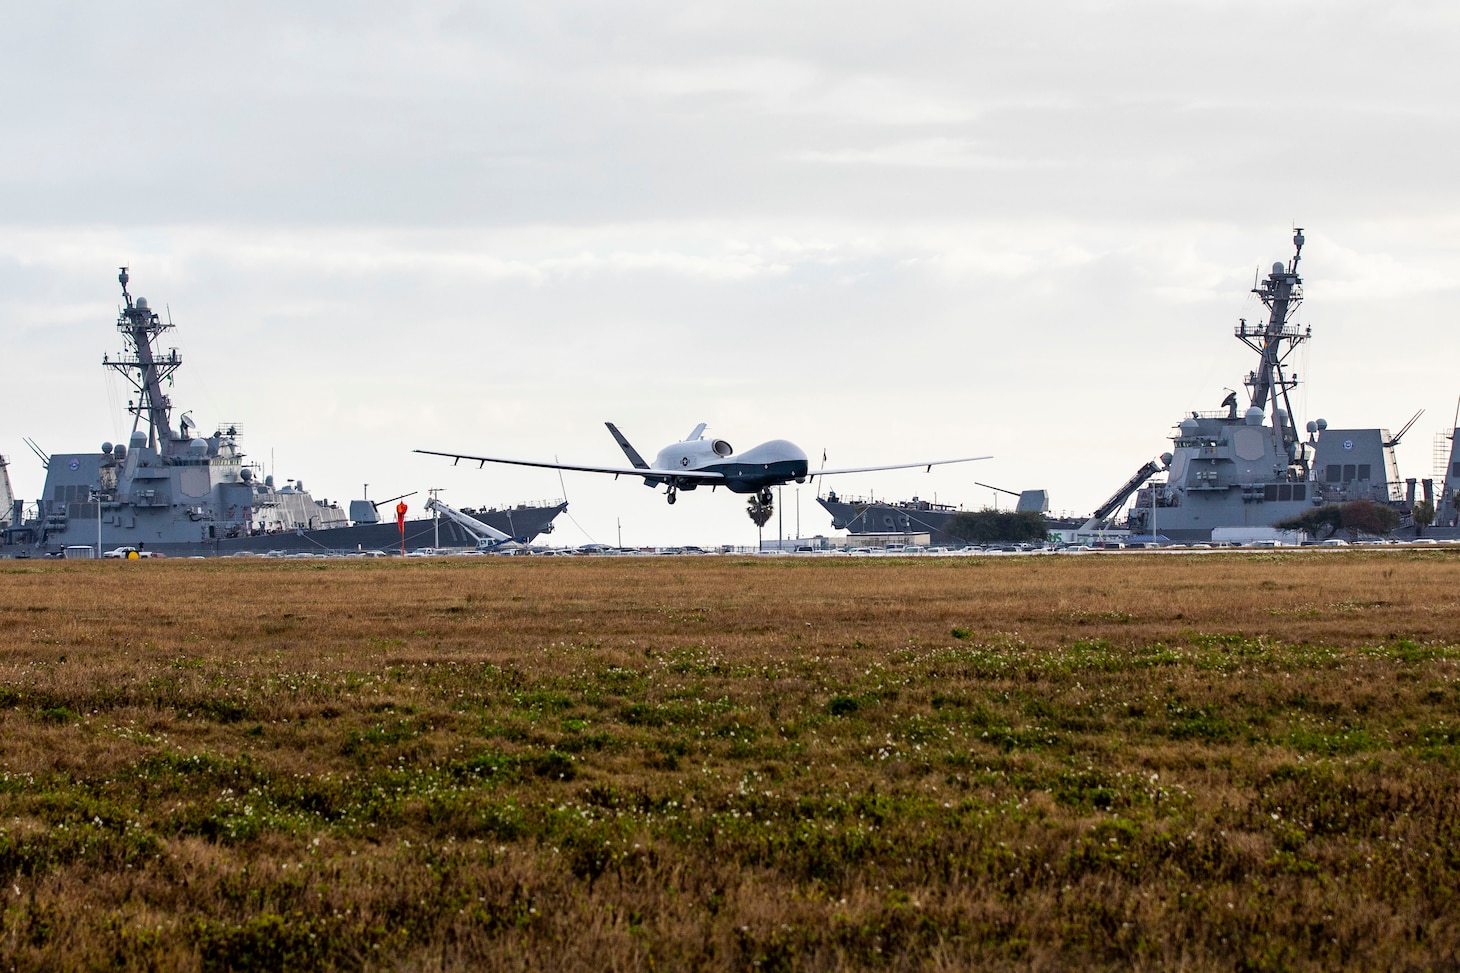 An MQ-4C Triton Unmanned Aircraft System (UAS), assigned to Unmanned Patrol Squadron 19 (VUP-19), lands